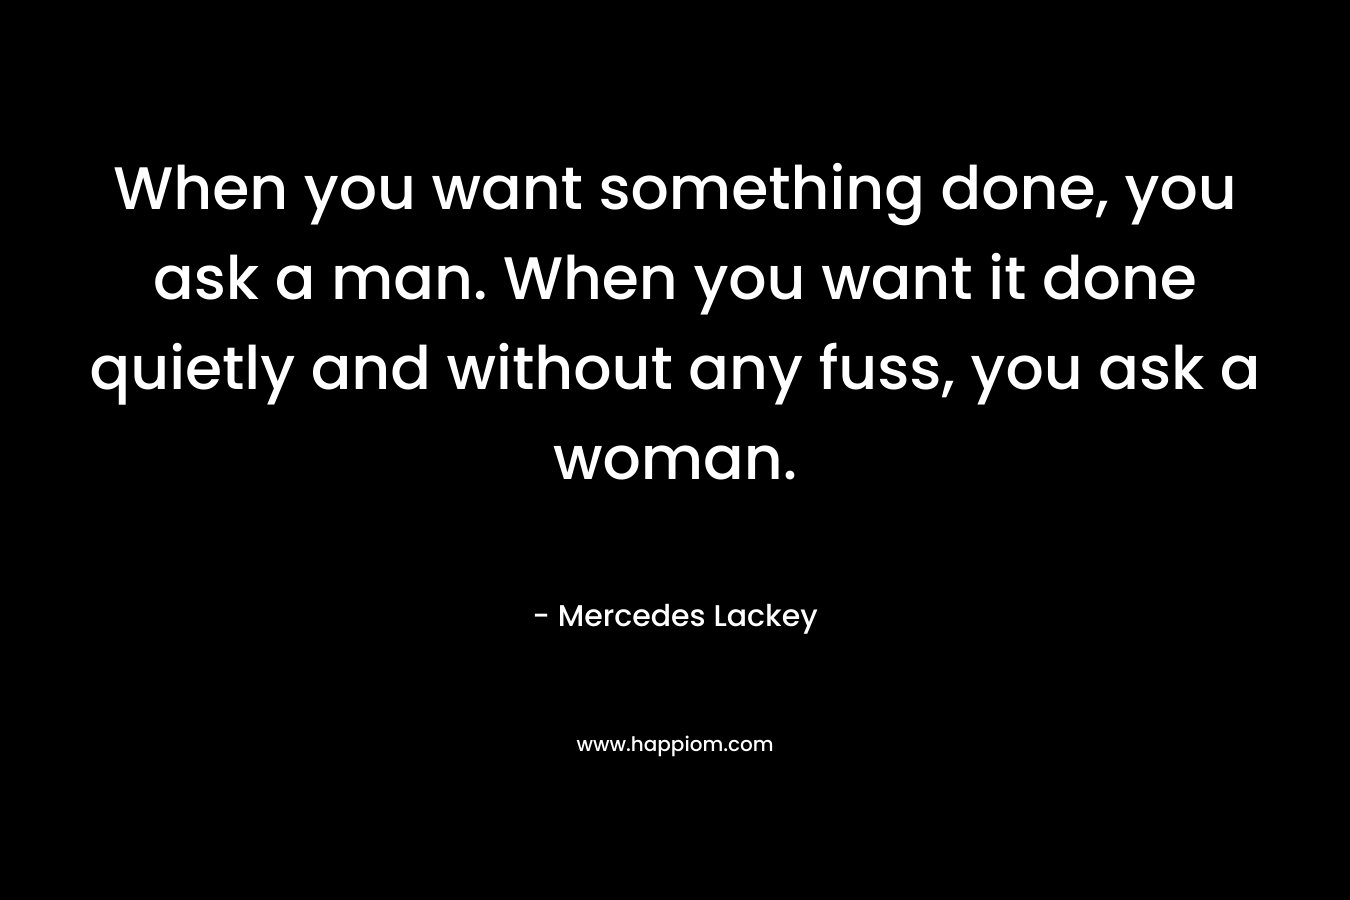 When you want something done, you ask a man. When you want it done quietly and without any fuss, you ask a woman.